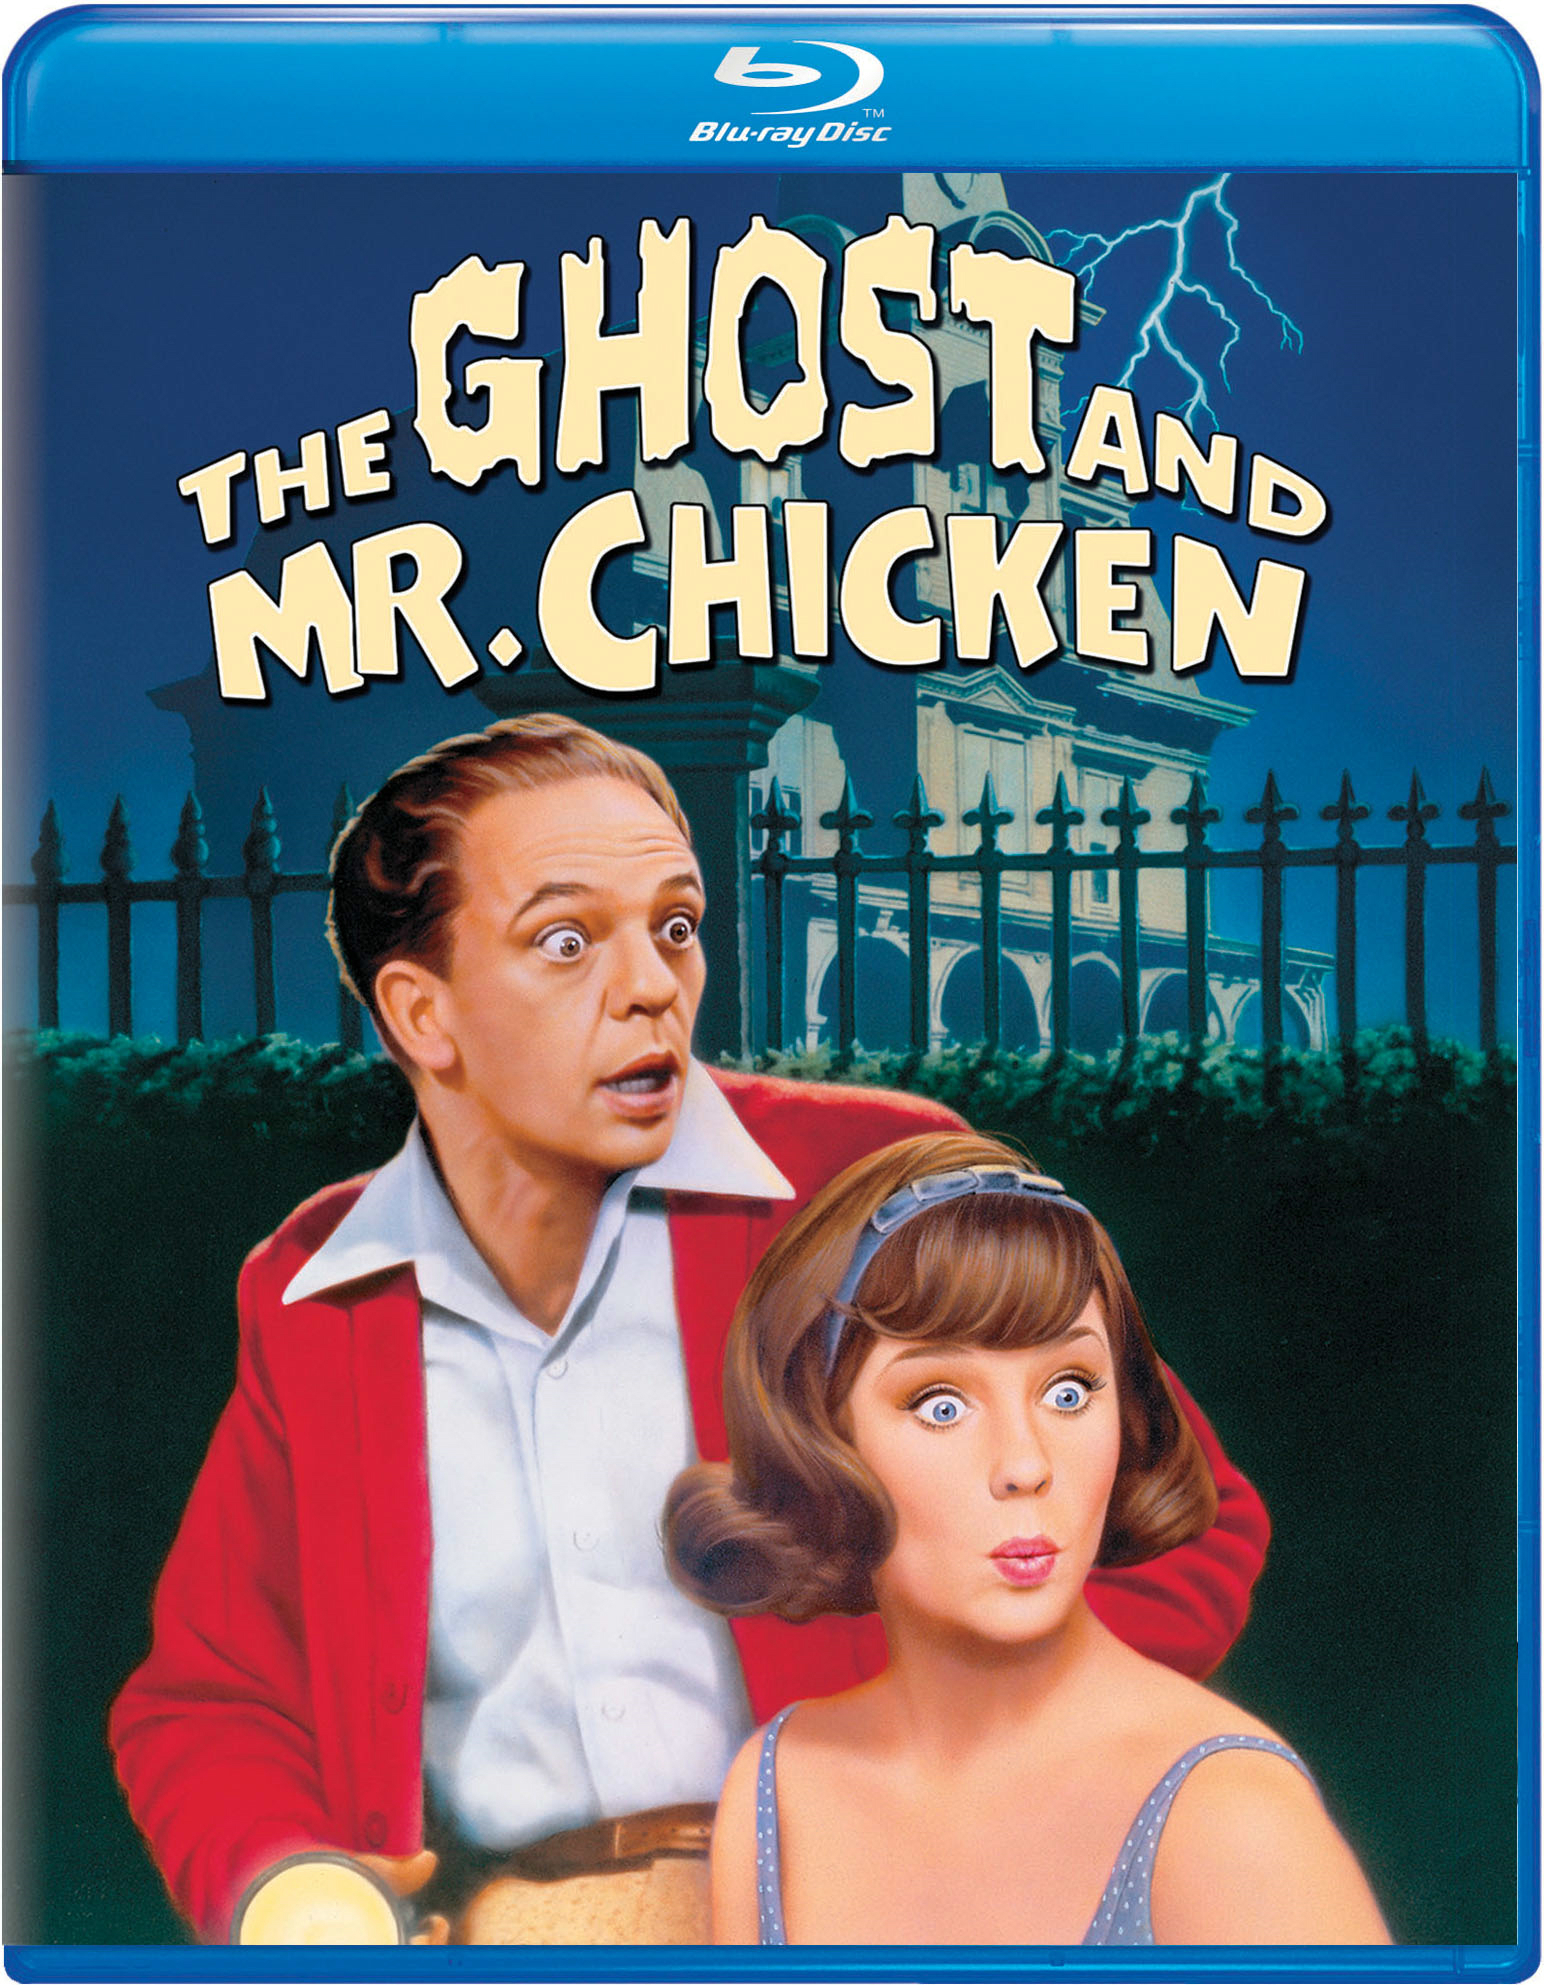 The Ghost And Mr. Chicken - Blu-ray [ 1966 ]  - Comedy Movies On Blu-ray - Movies On GRUV